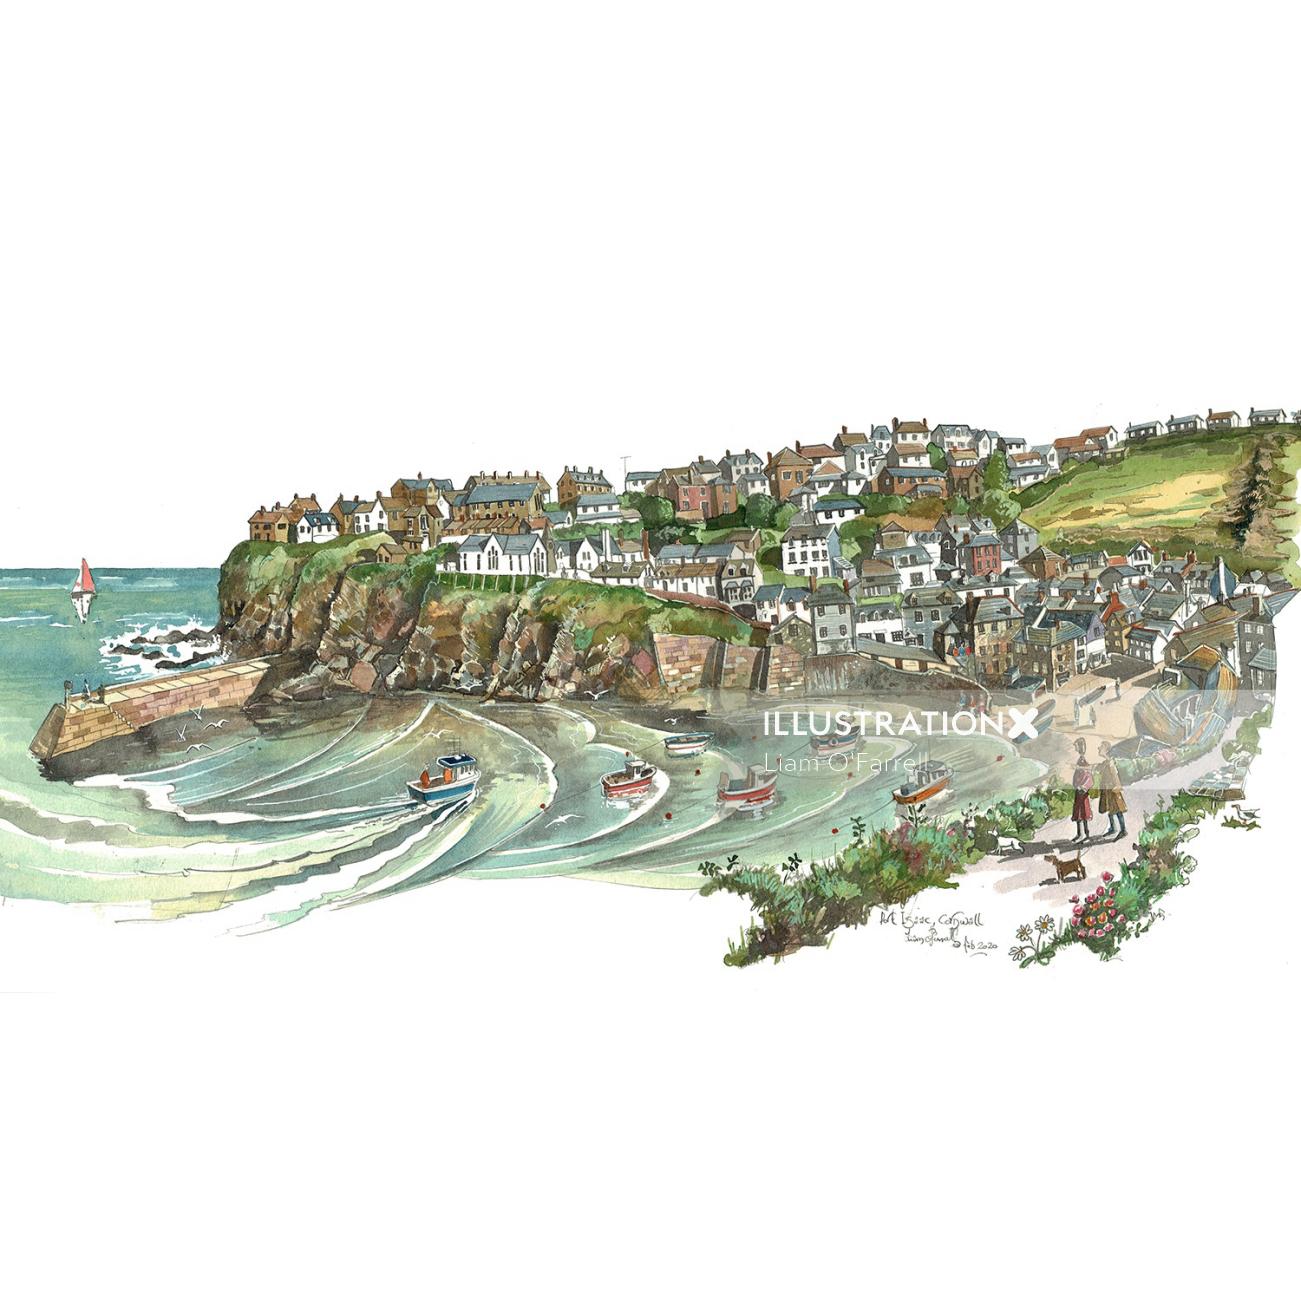 Editorial illustration of Port Issac in Cornwall